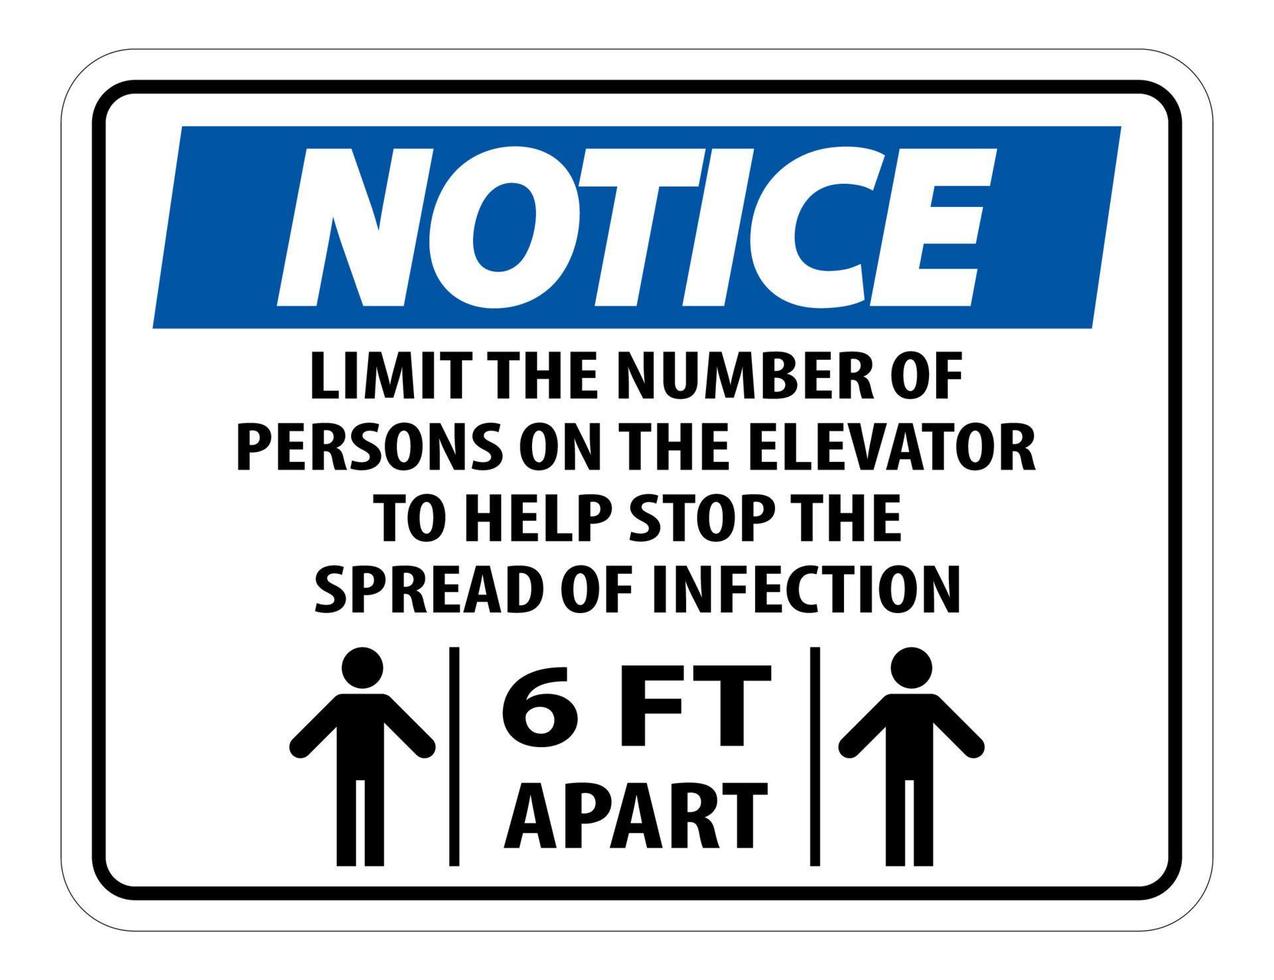 Notice Elevator Physical Distancing Sign Isolate On White Background,Vector Illustration EPS.10 vector